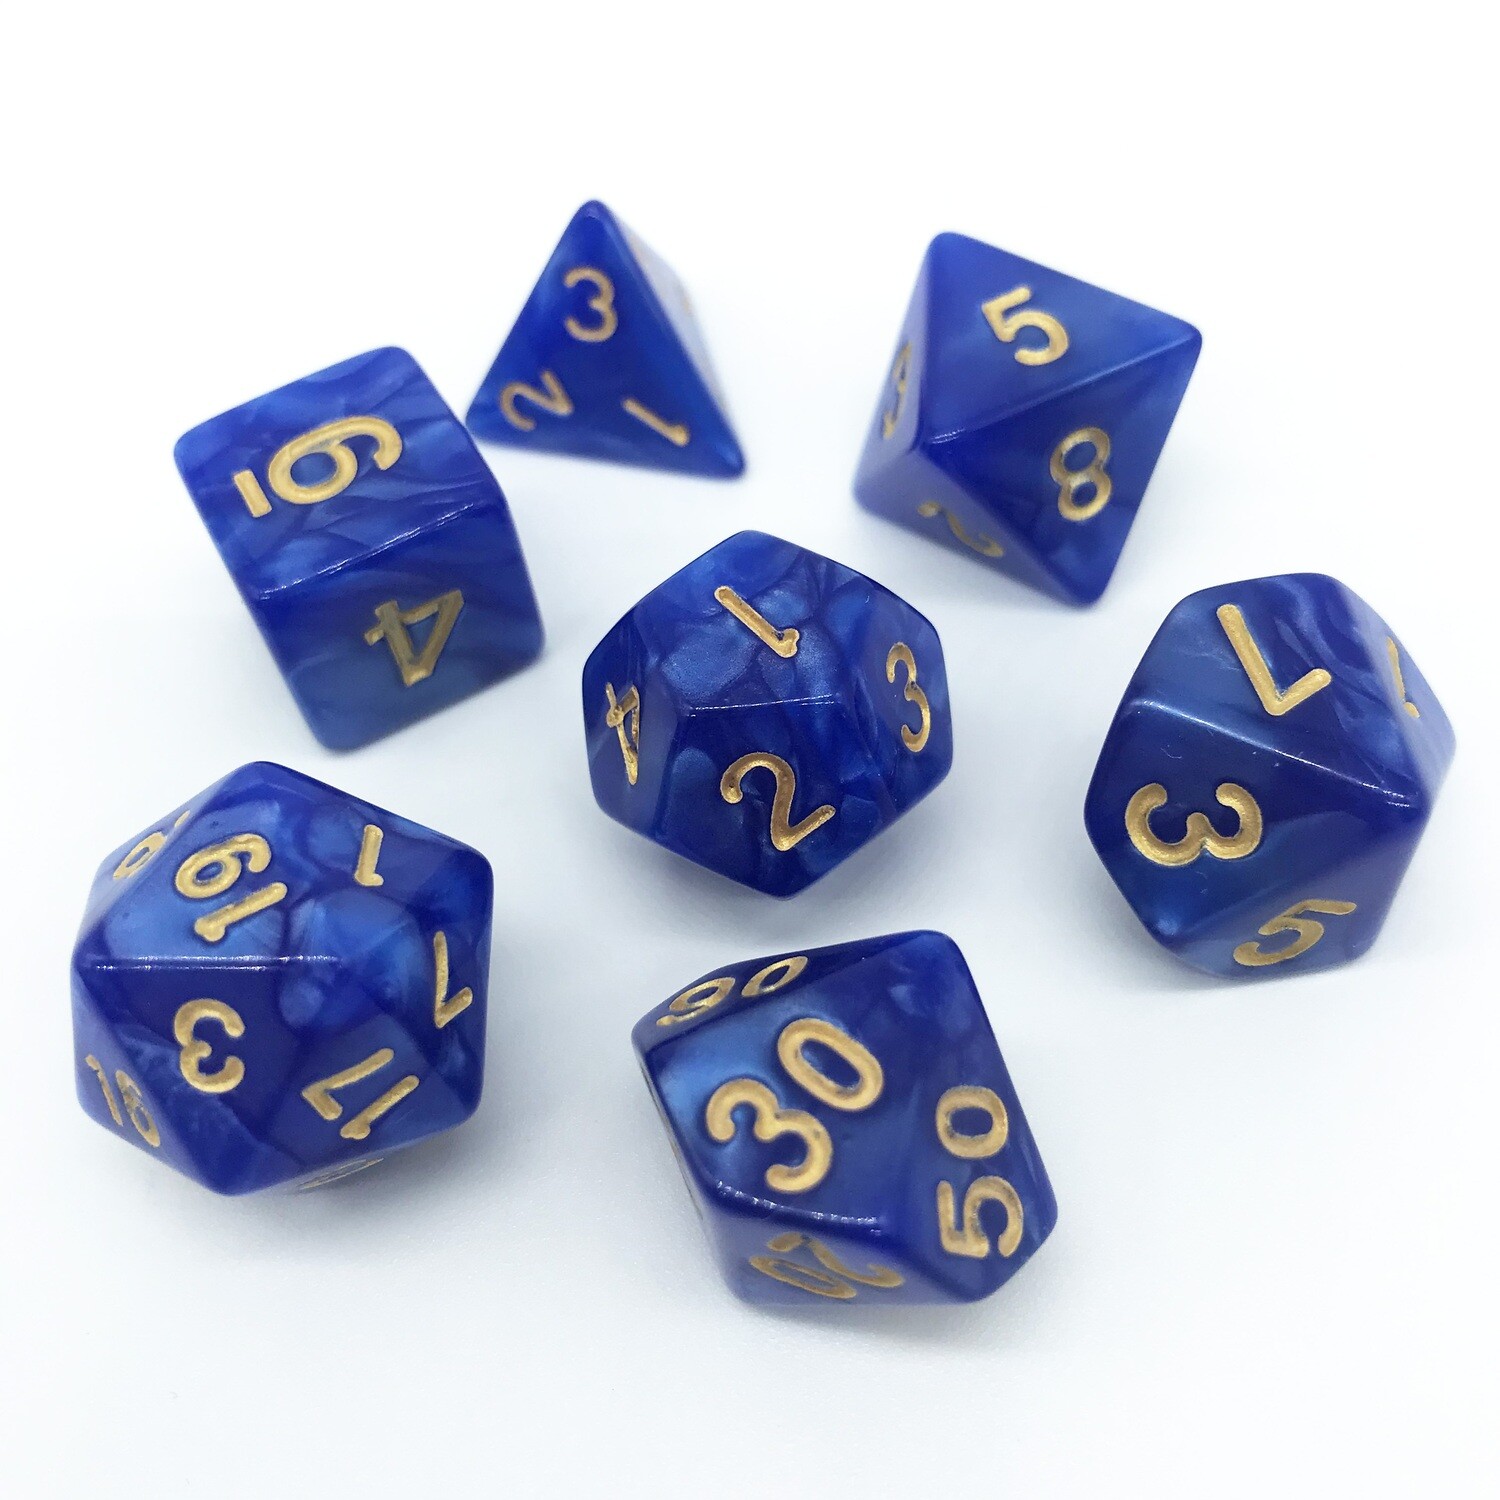 Dice Set - Blue marbled with gold numbers